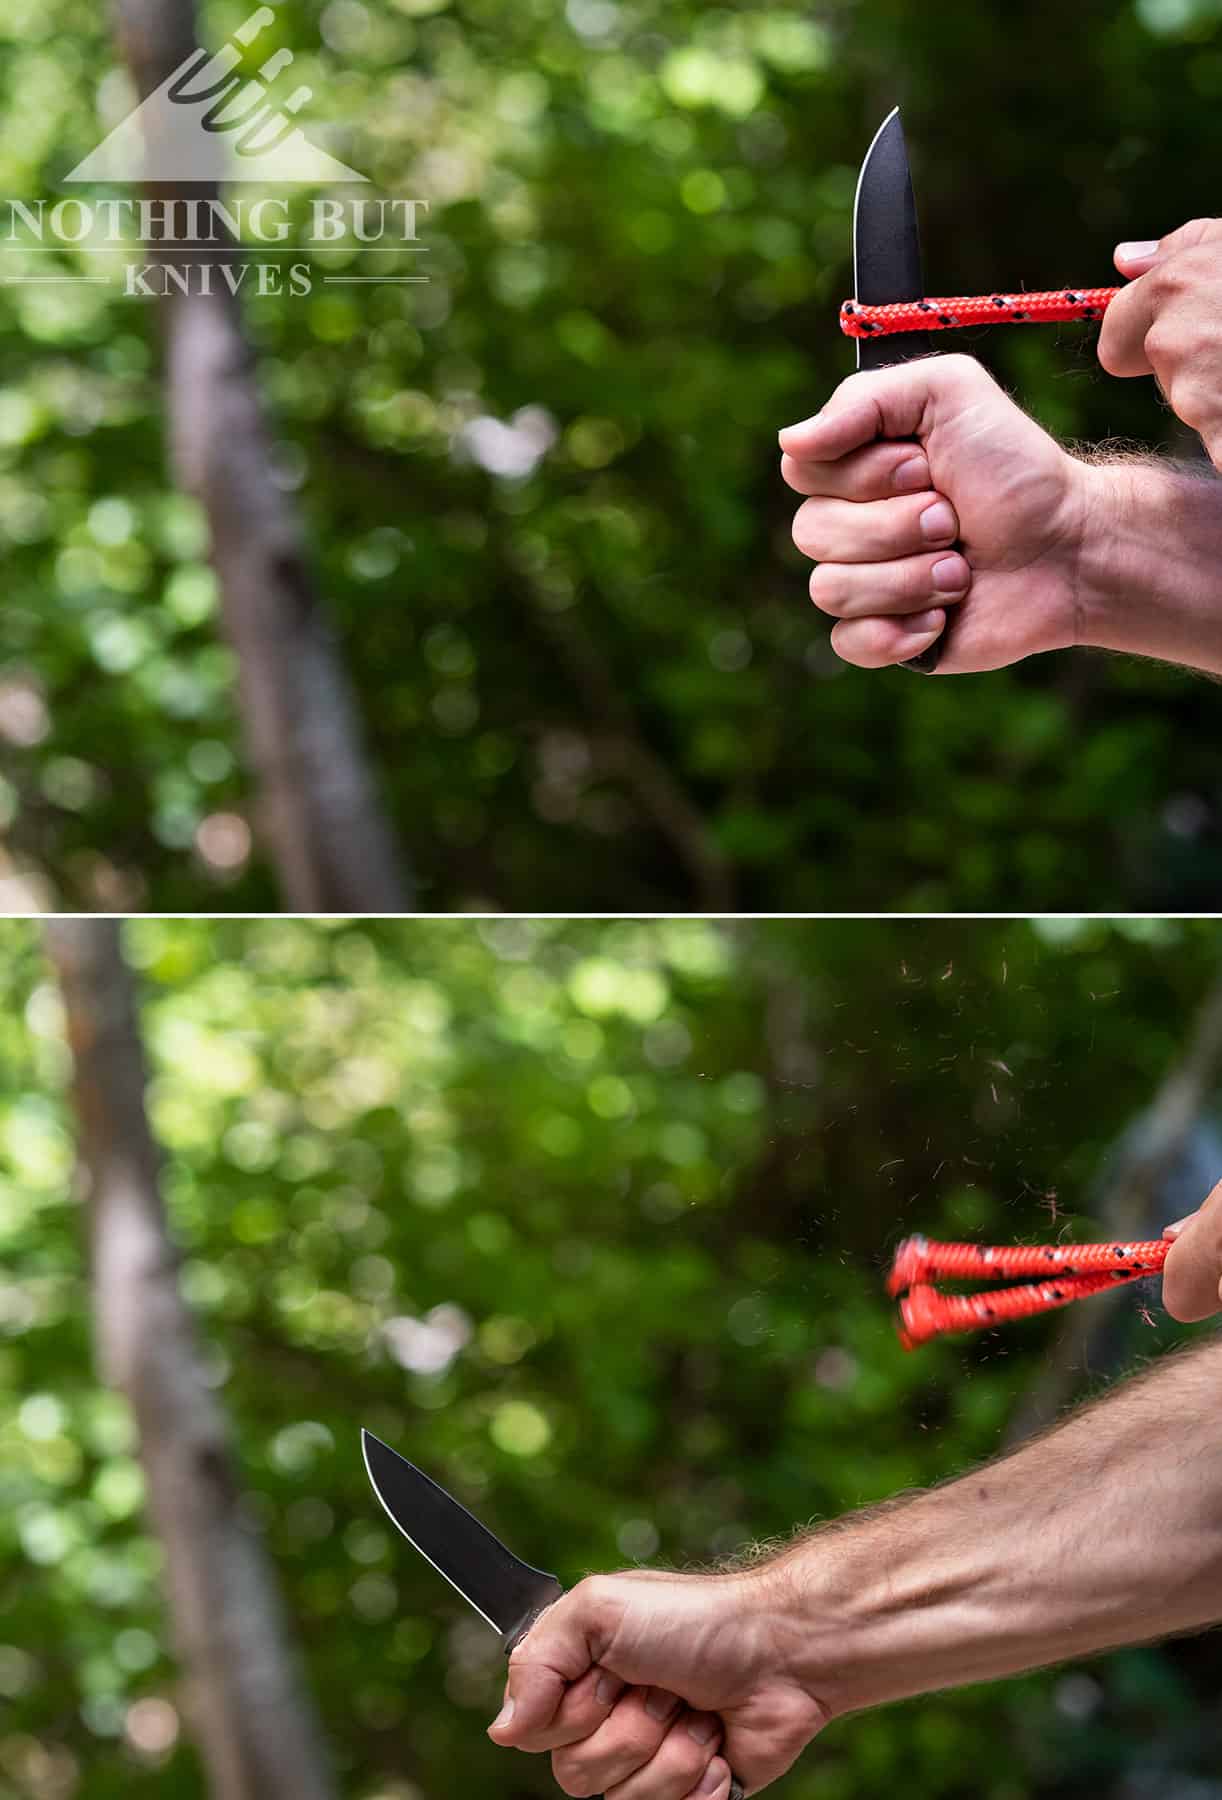 This rope slicing image show's the amount of force required to accomplish simple tasks with the Alala. 